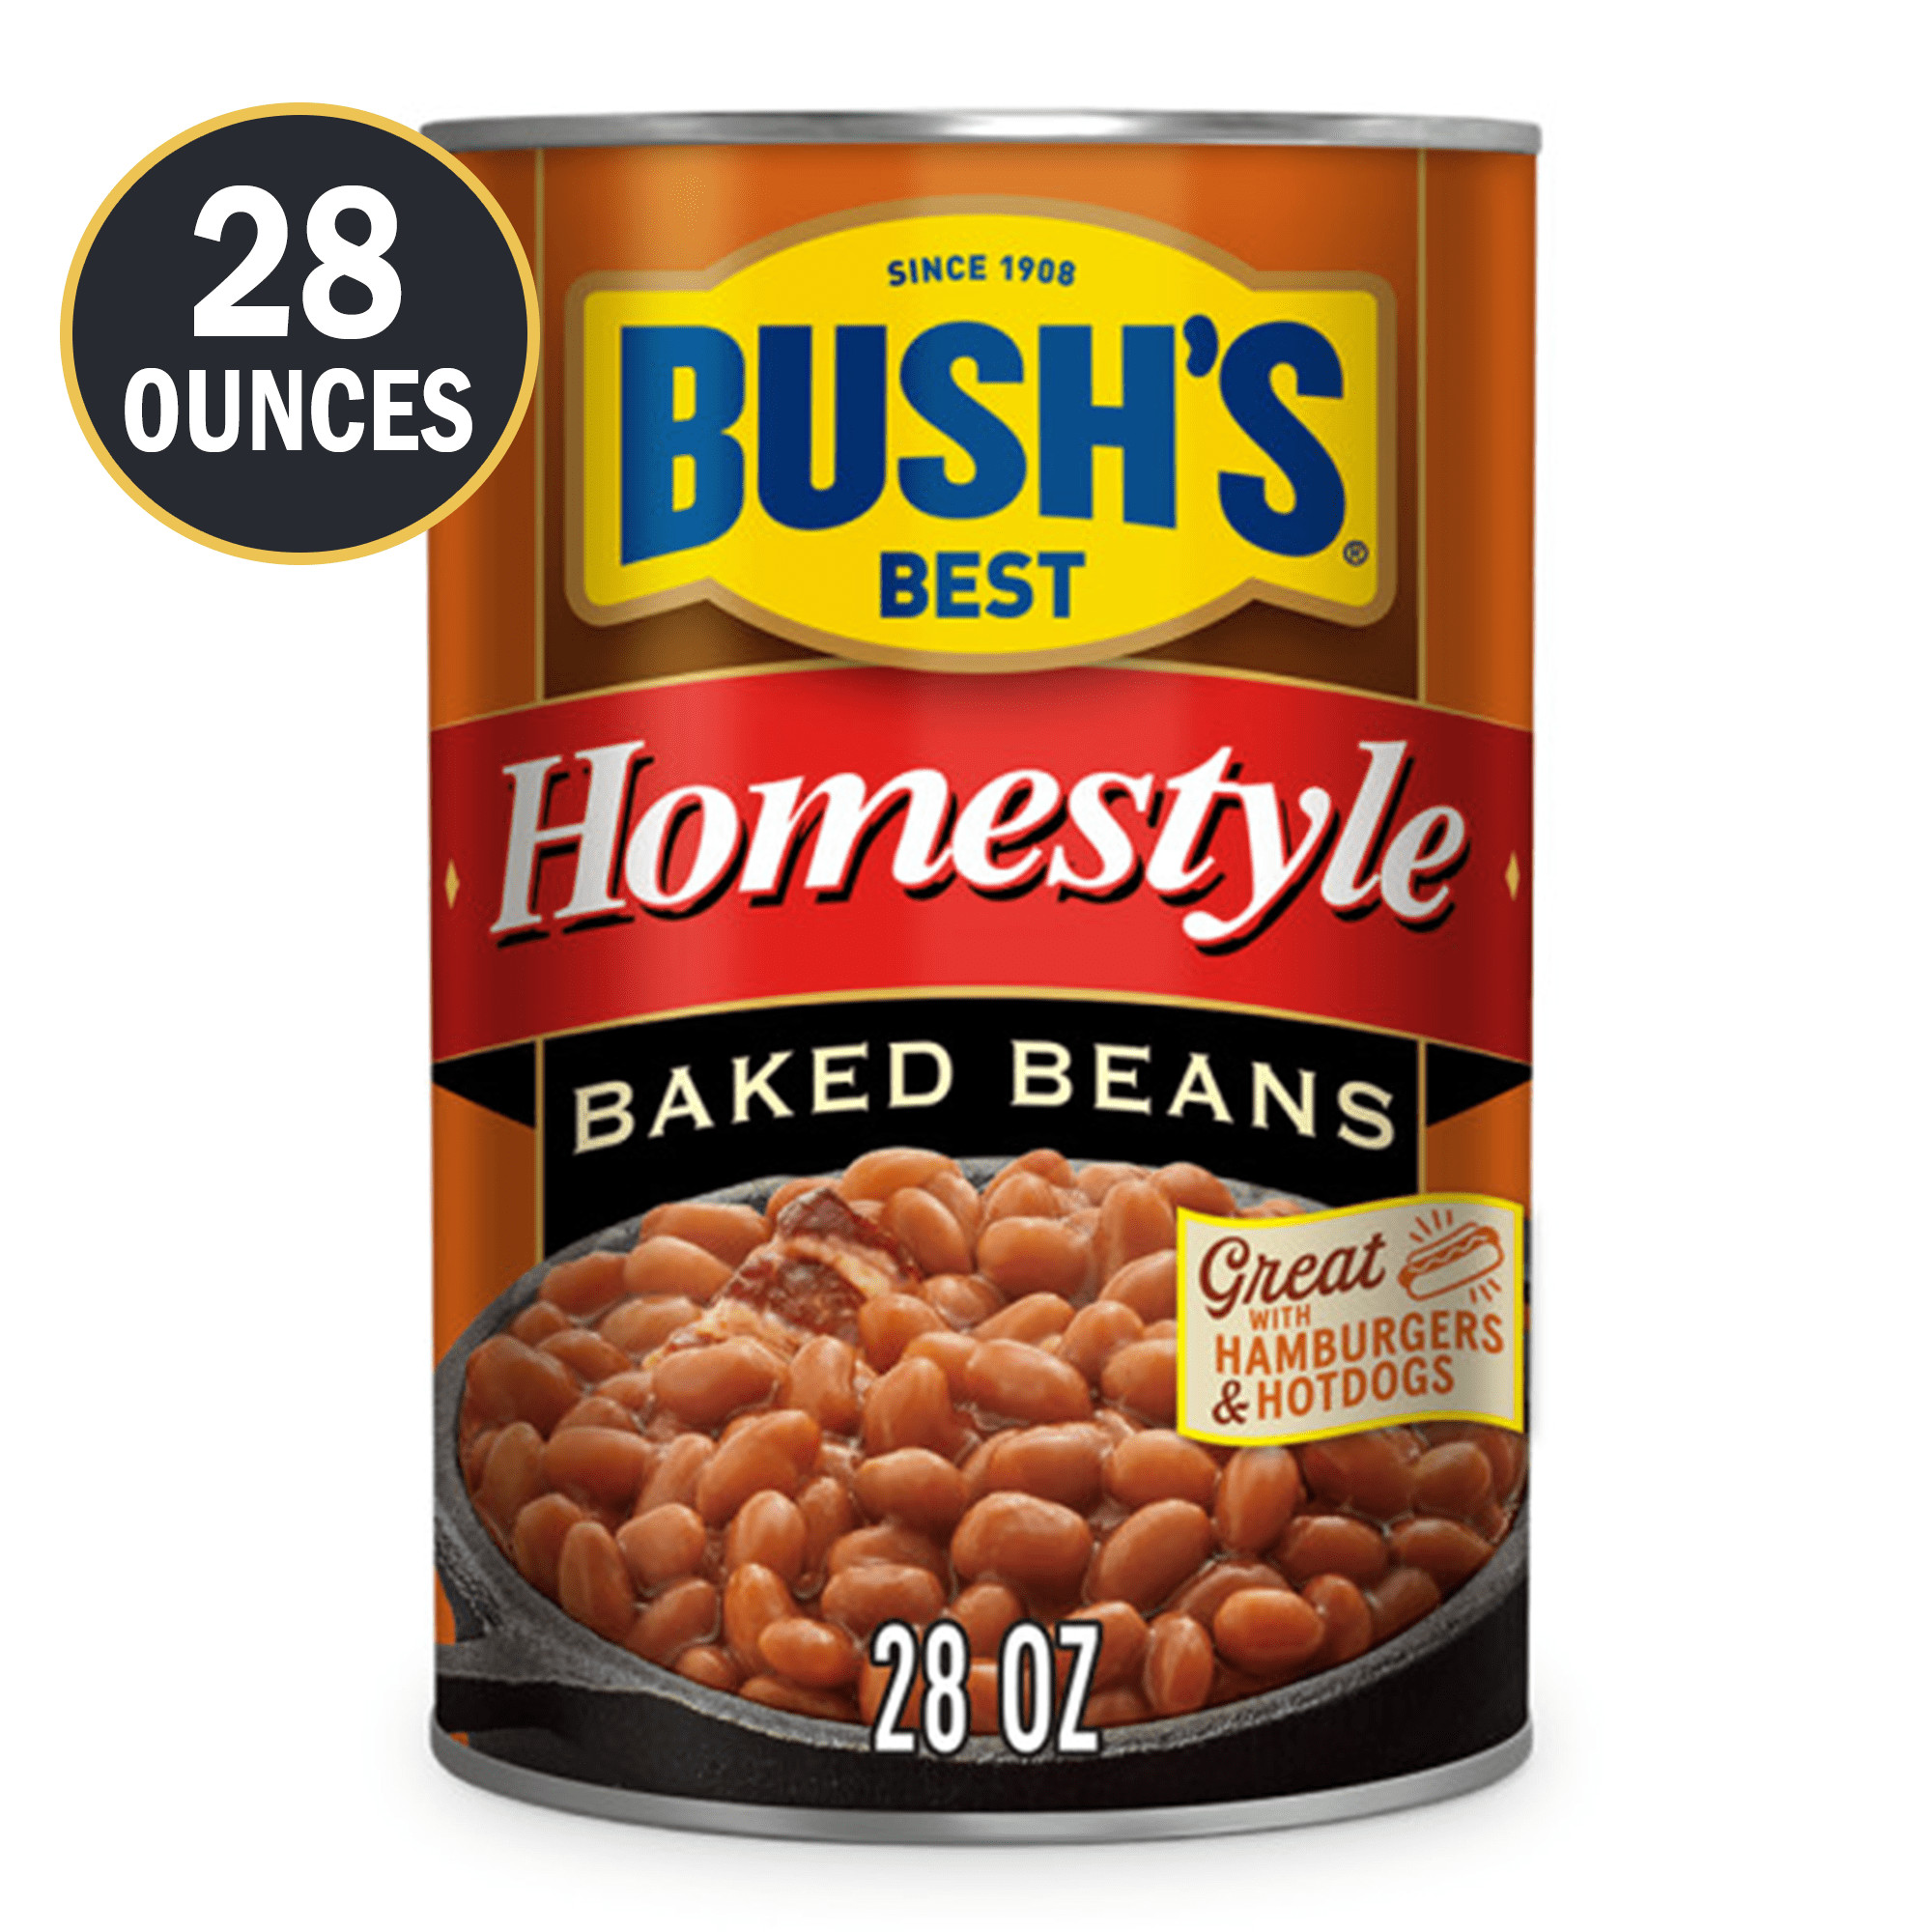 Bush's Homestyle Baked Beans, Canned Beans, 28 oz Can - image 1 of 7